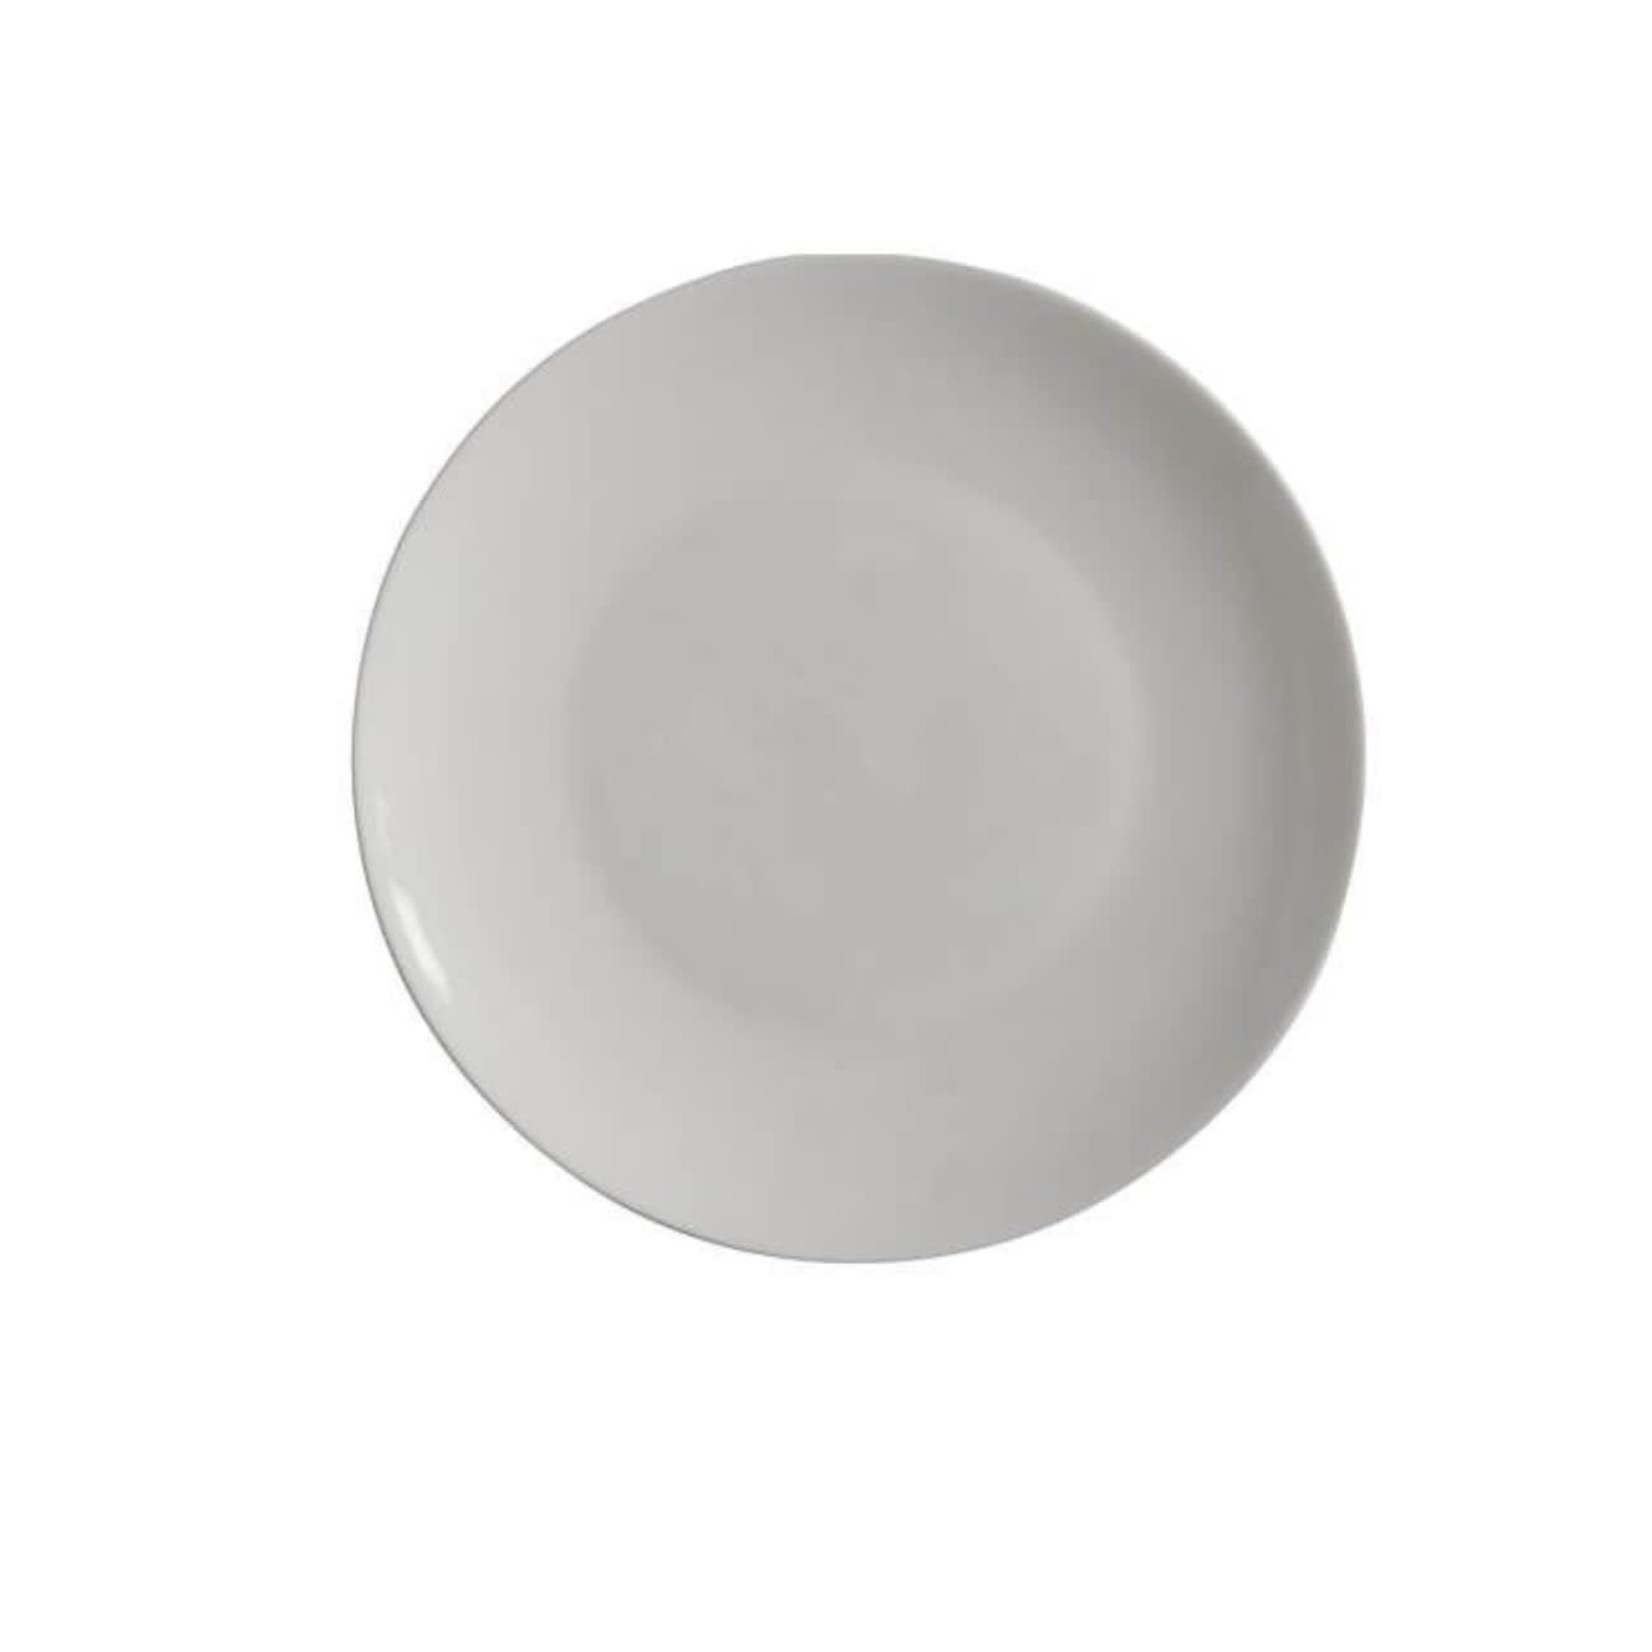 MAXWELL WILLIAMS MAXWELL WILLIAMS Cashmere Coupe Side Plate 19cm